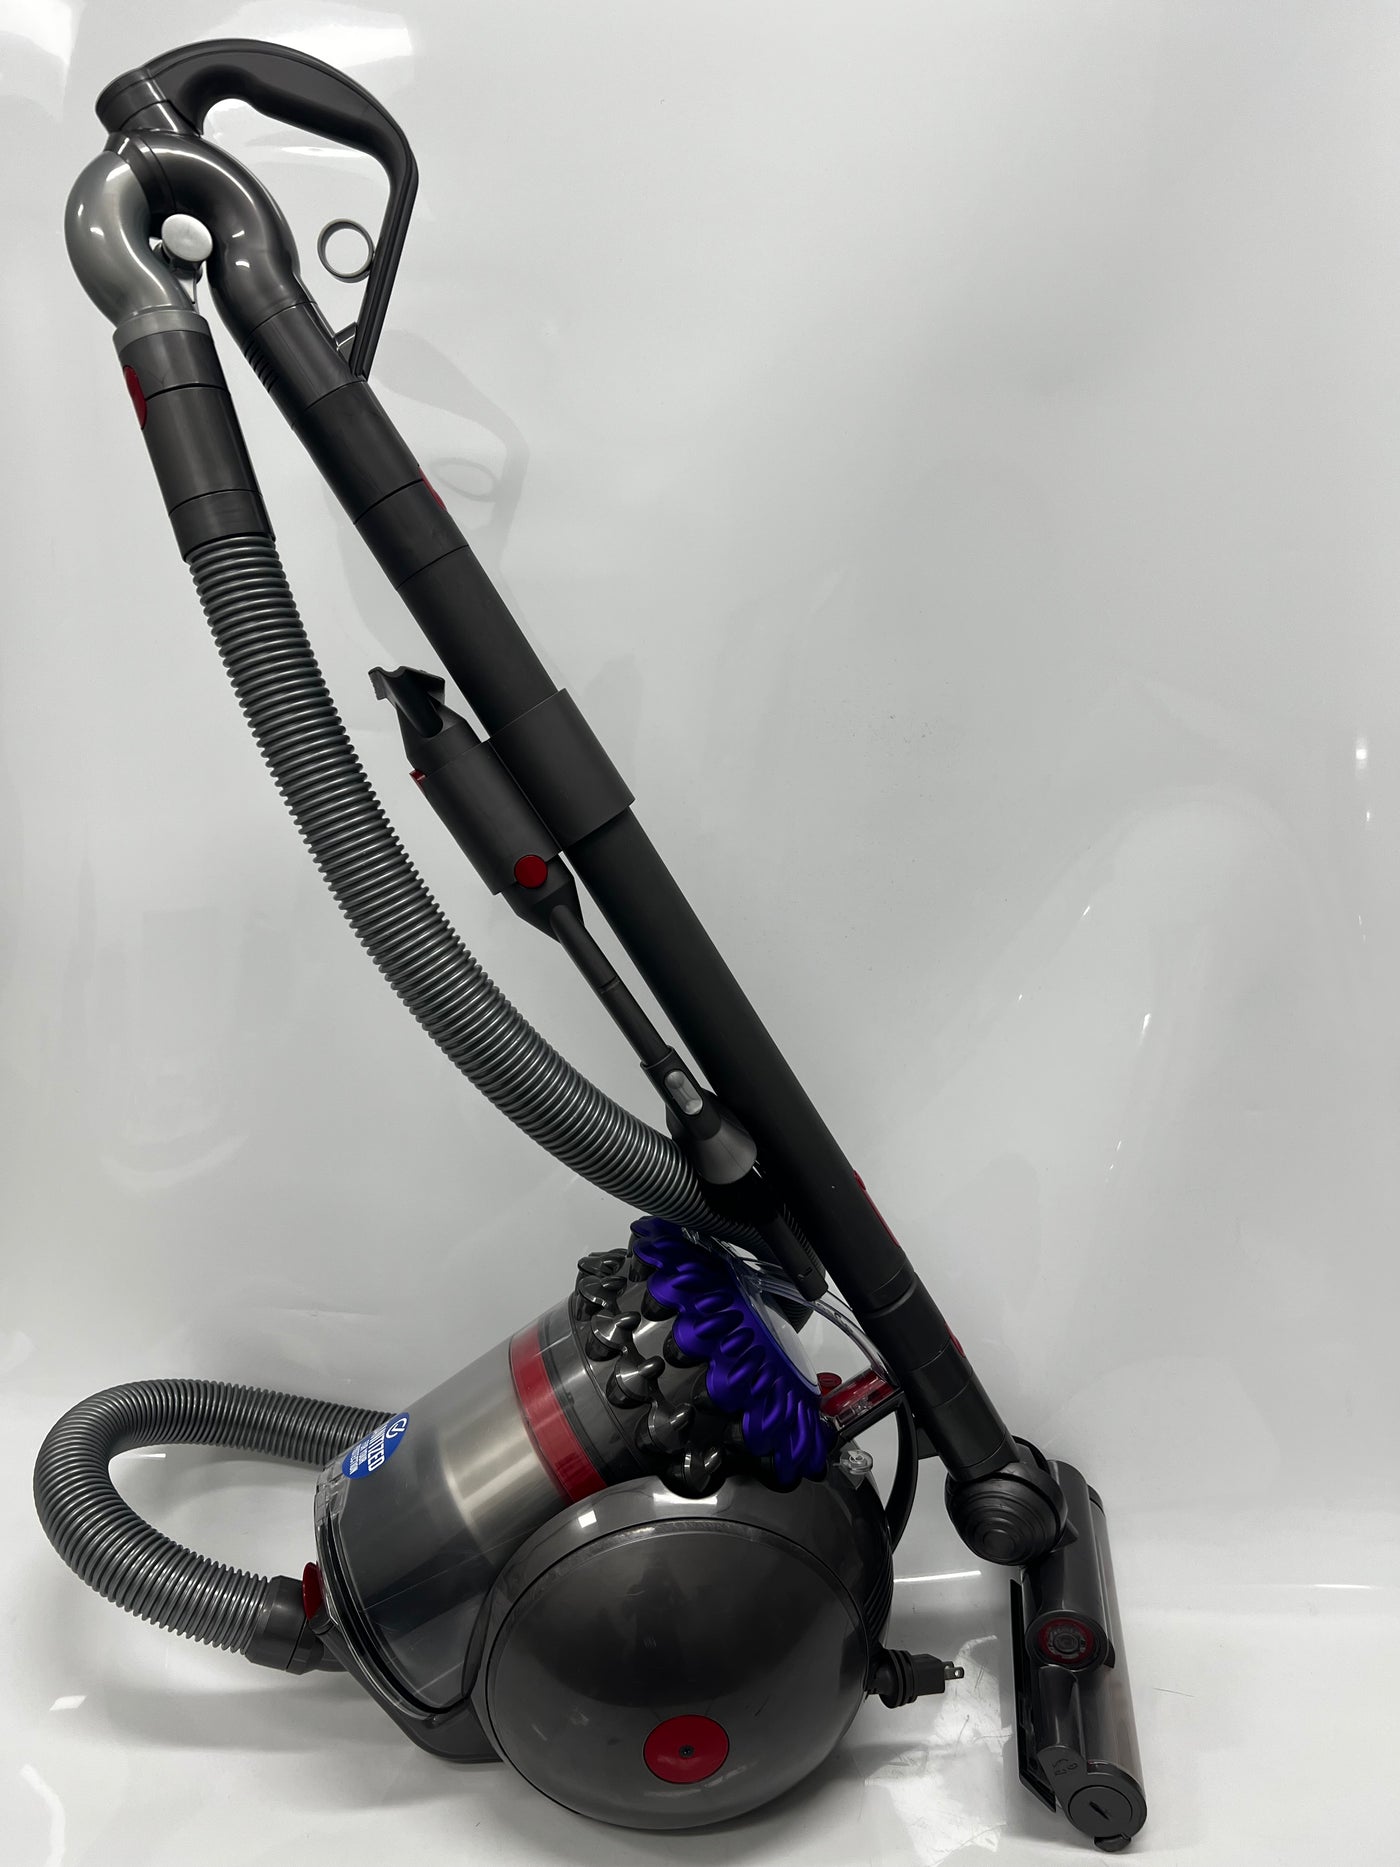 Superior Vacuums - Dyson Cinetic Big Ball Pro vacuum cleaner